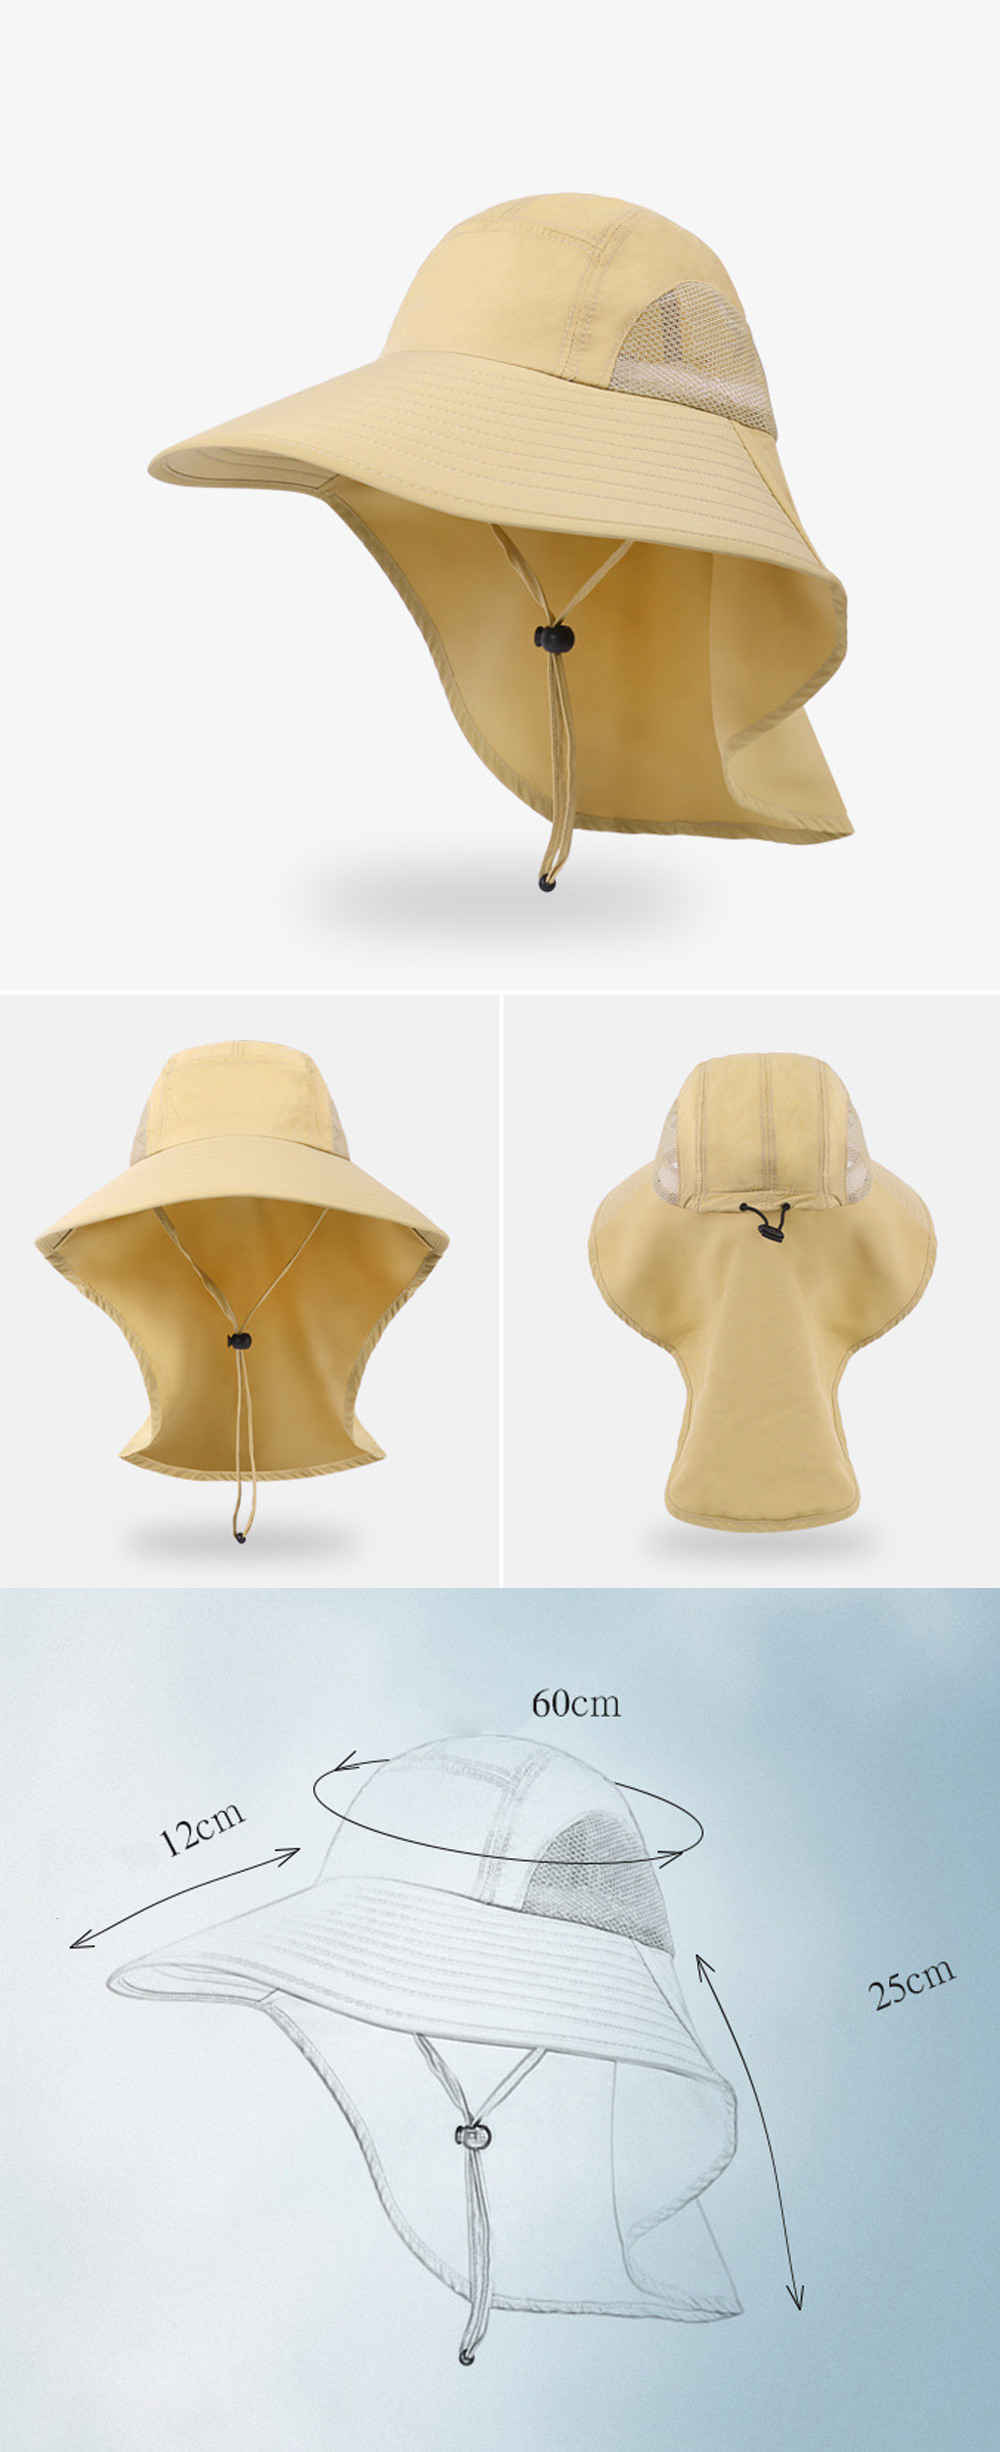 Folding-Fishing-Hat-Wide-Brim-UPF50-Breathable-Quick-Dry-Sun-Cap-with-Neck-Flap-Hunting-Climbing-Cam-1869997-5